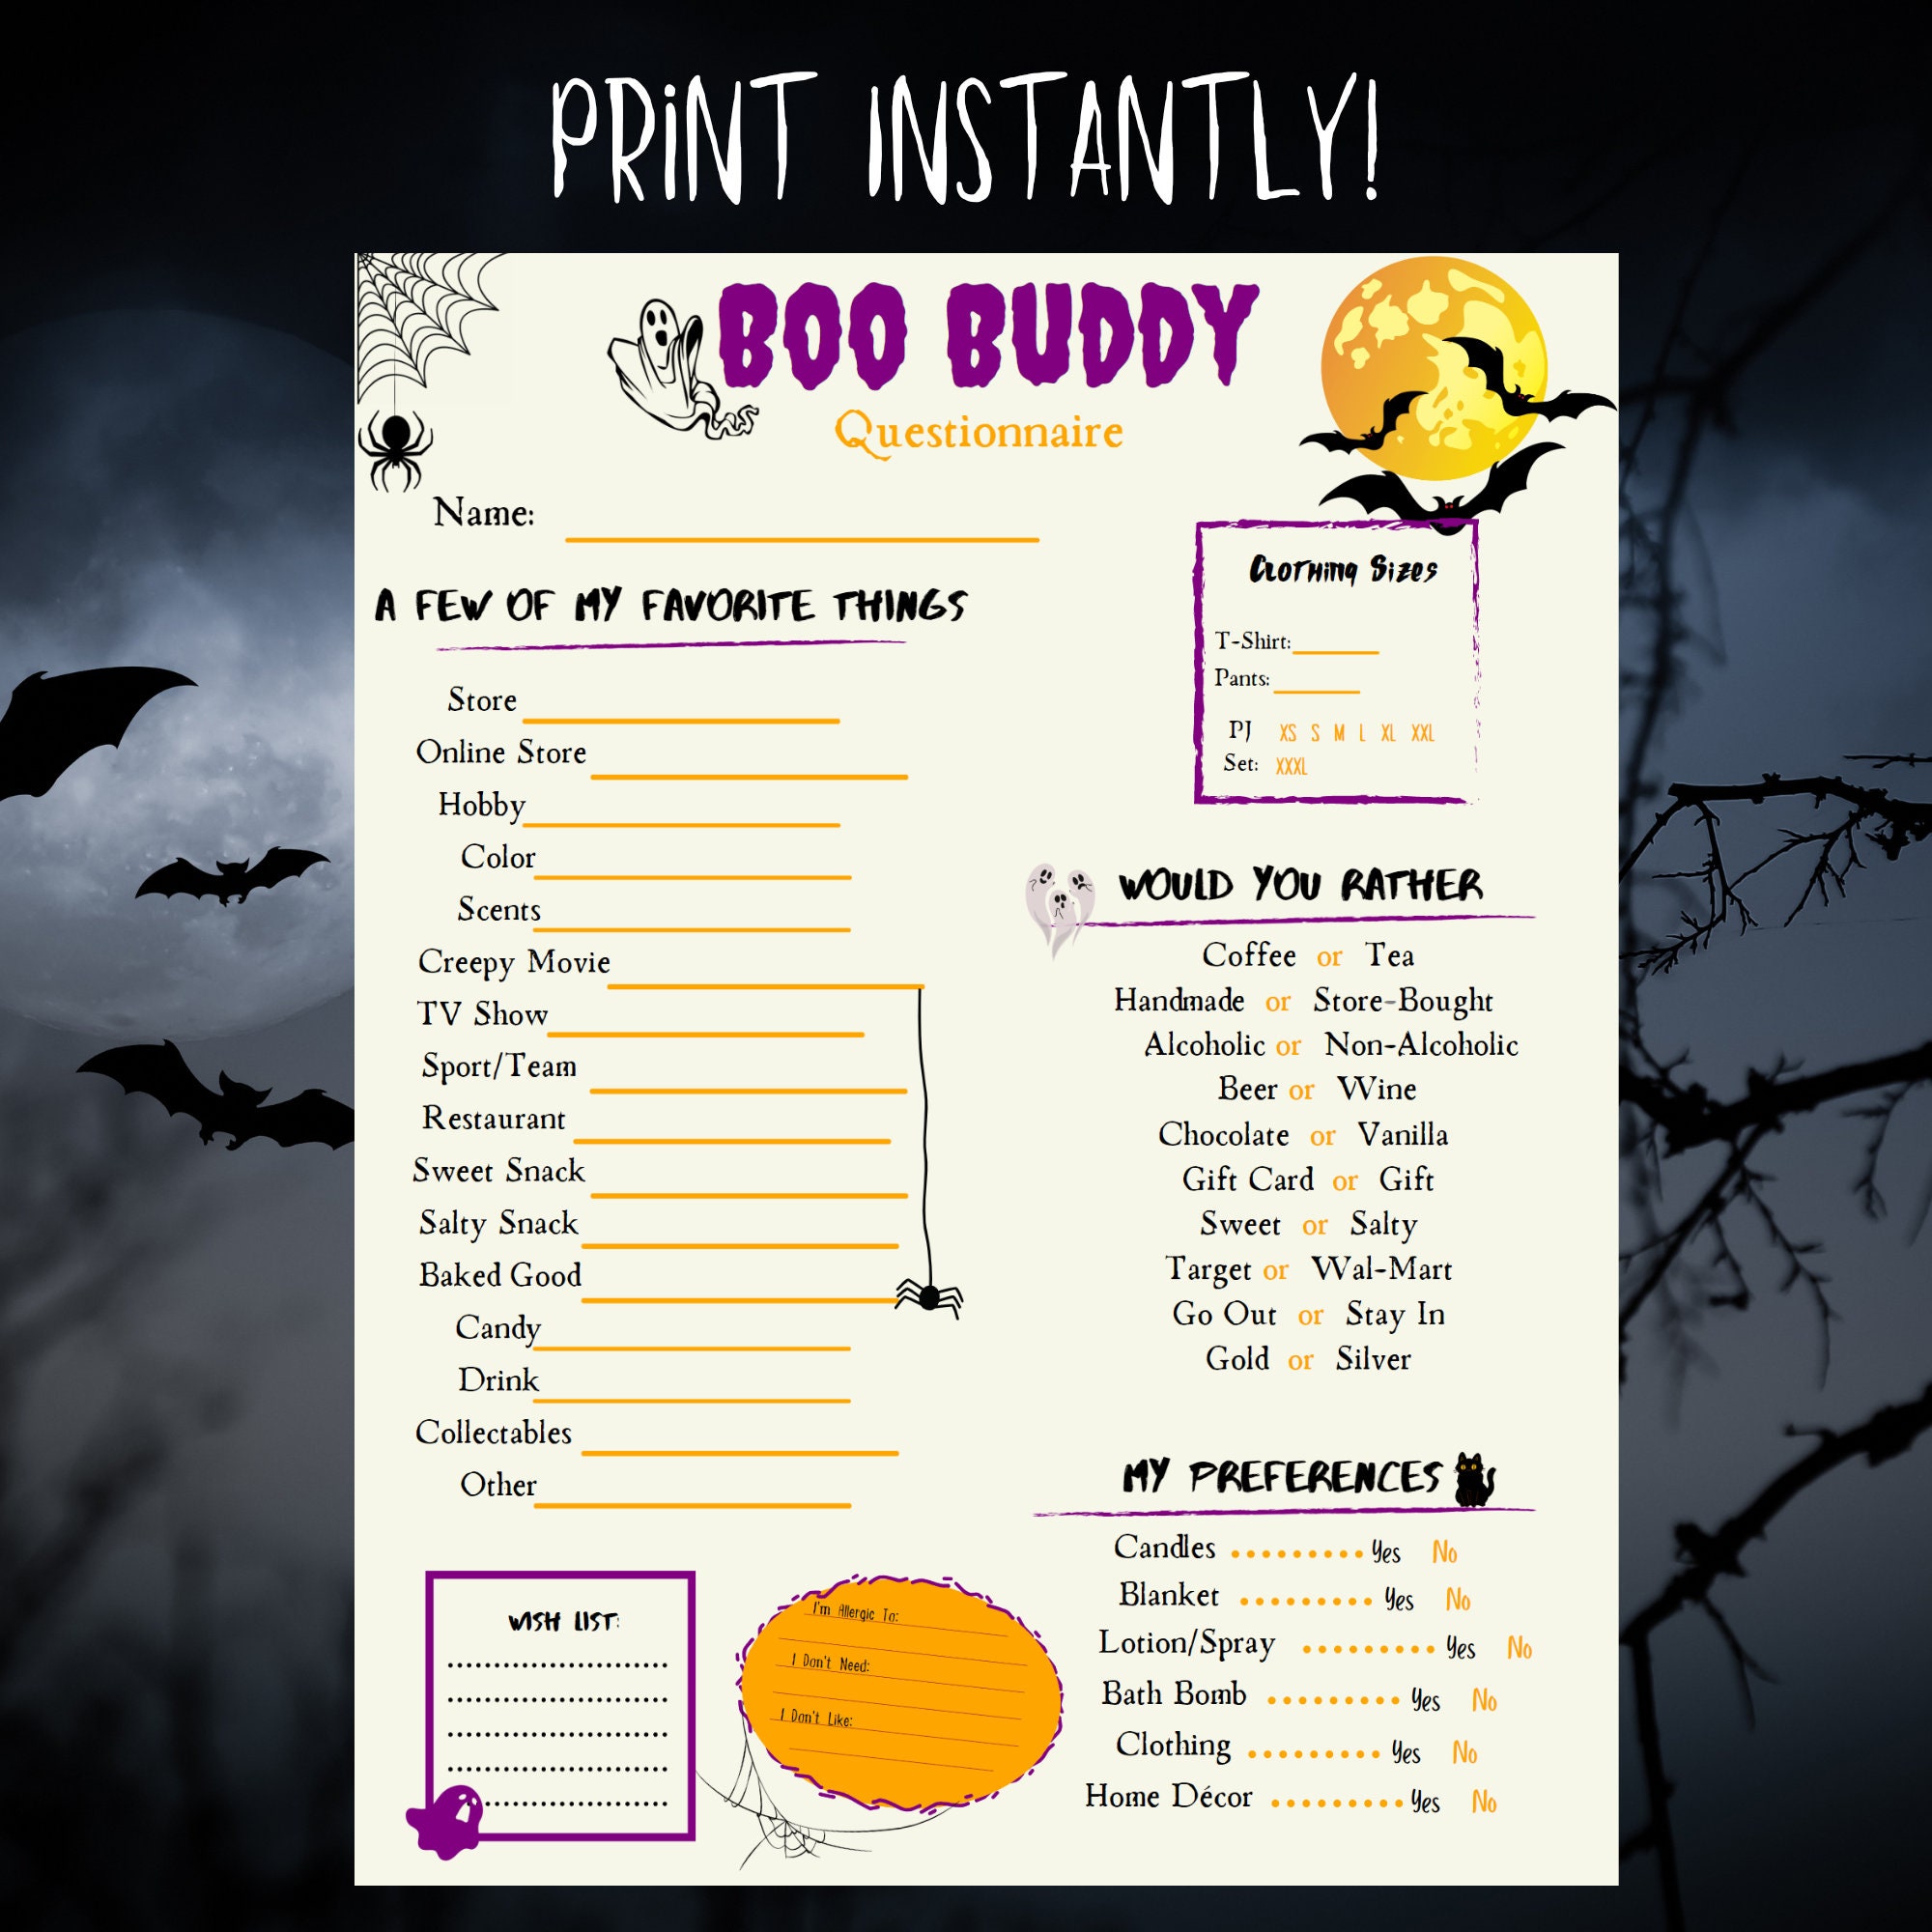 boo-buddy-questionnaire-gift-exchange-questionnaire-halloween-sign-up-sheet-printable